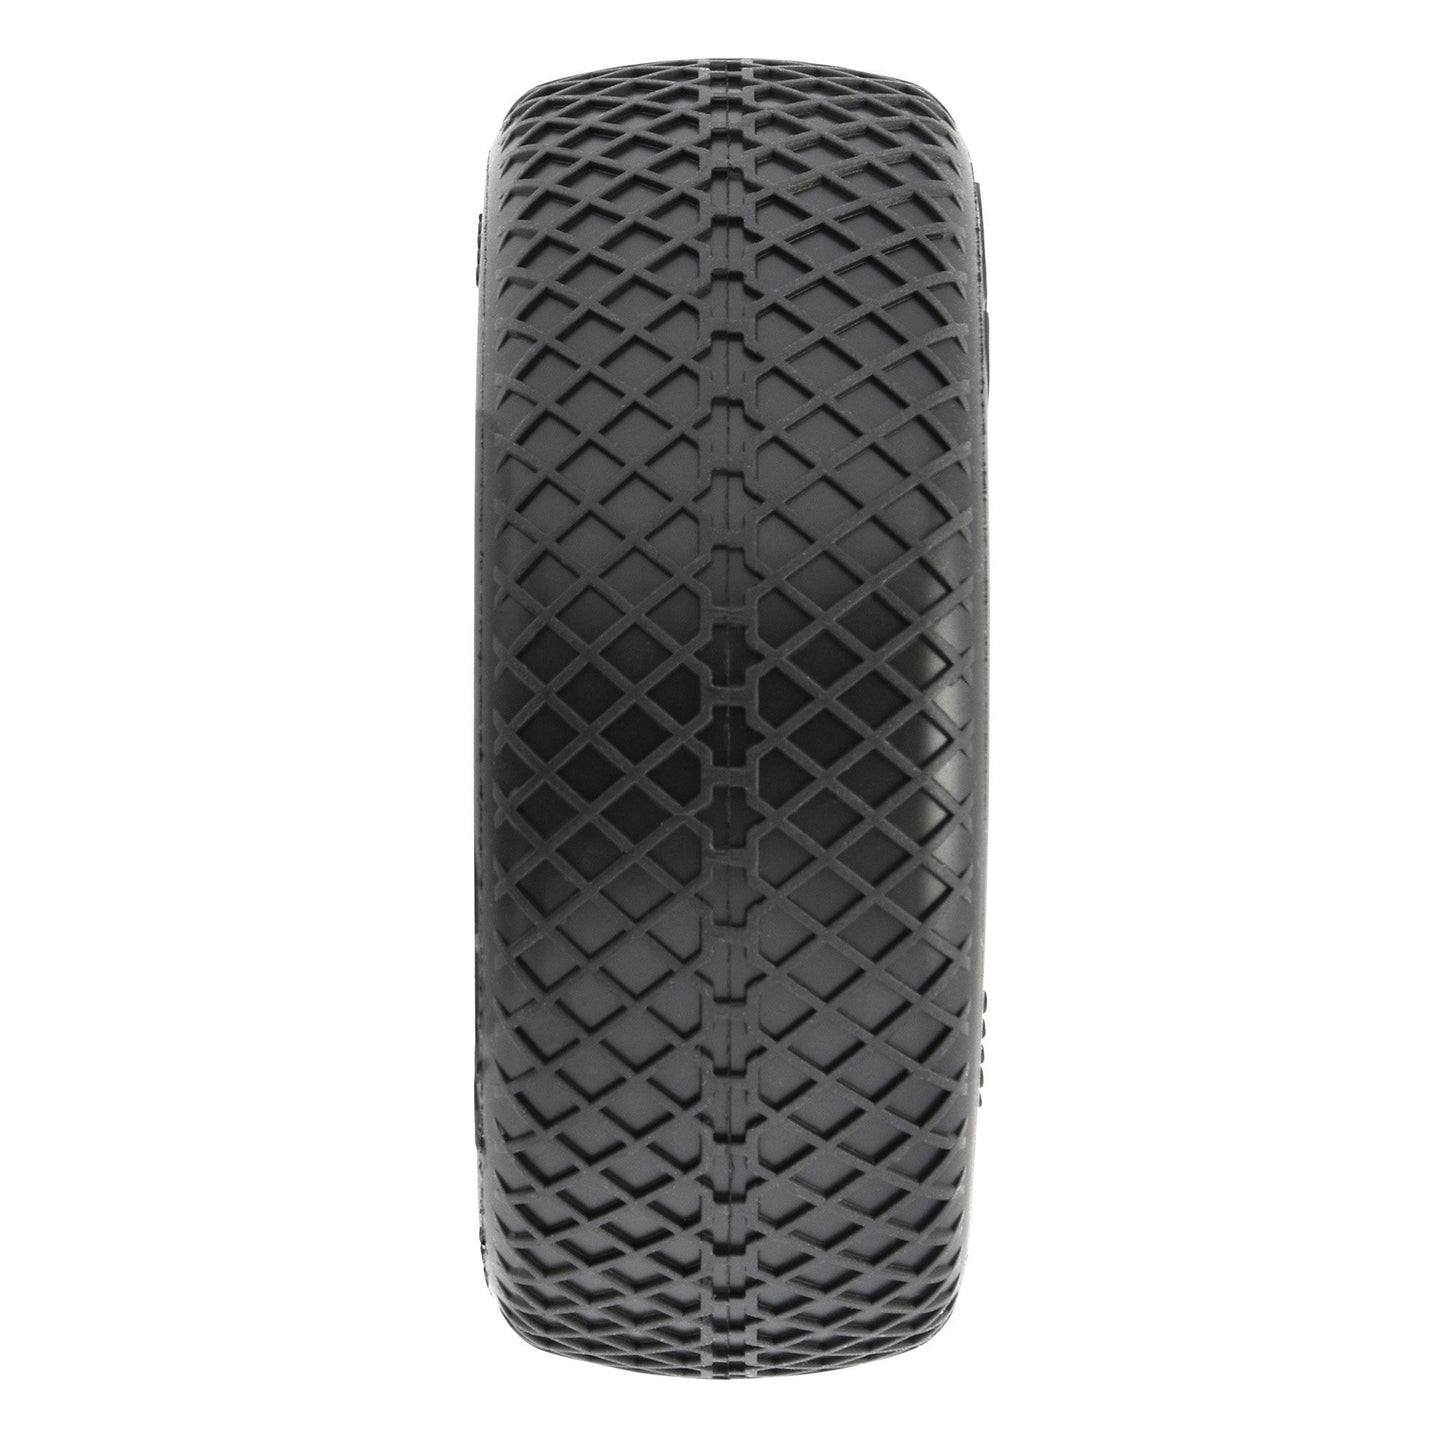 1/10 Viper Medium Soft 4WD Front 2.2" Off-Road Buggy Tires (2) - Dirt Cheap RC SAVING YOU MONEY, ONE PART AT A TIME